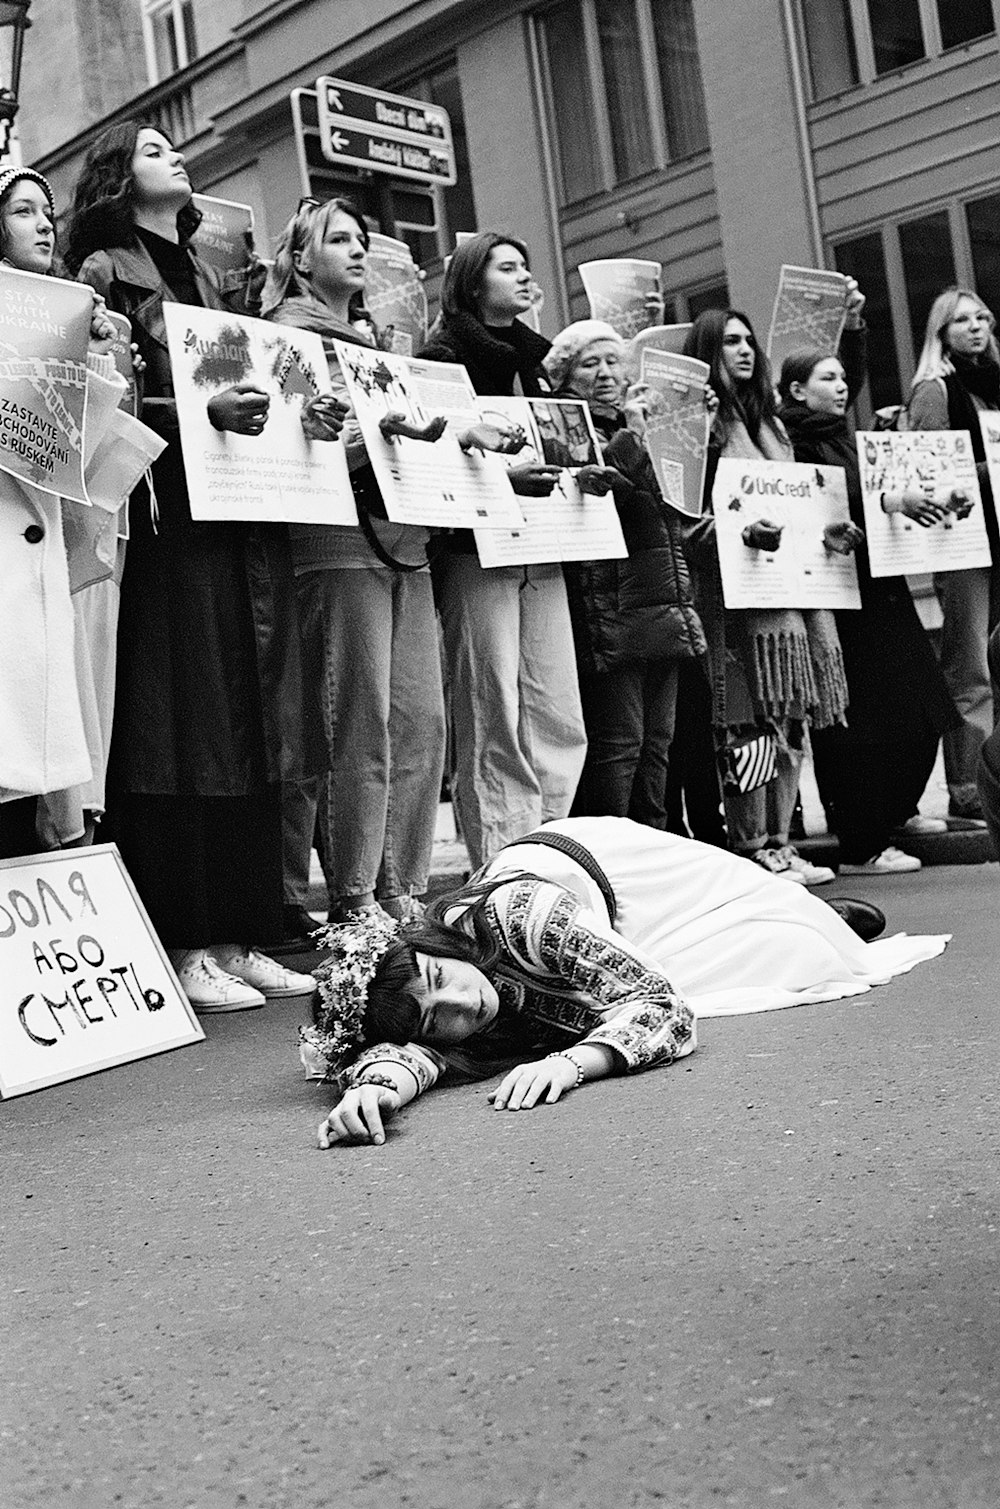 a group of people holding signs and laying on the ground